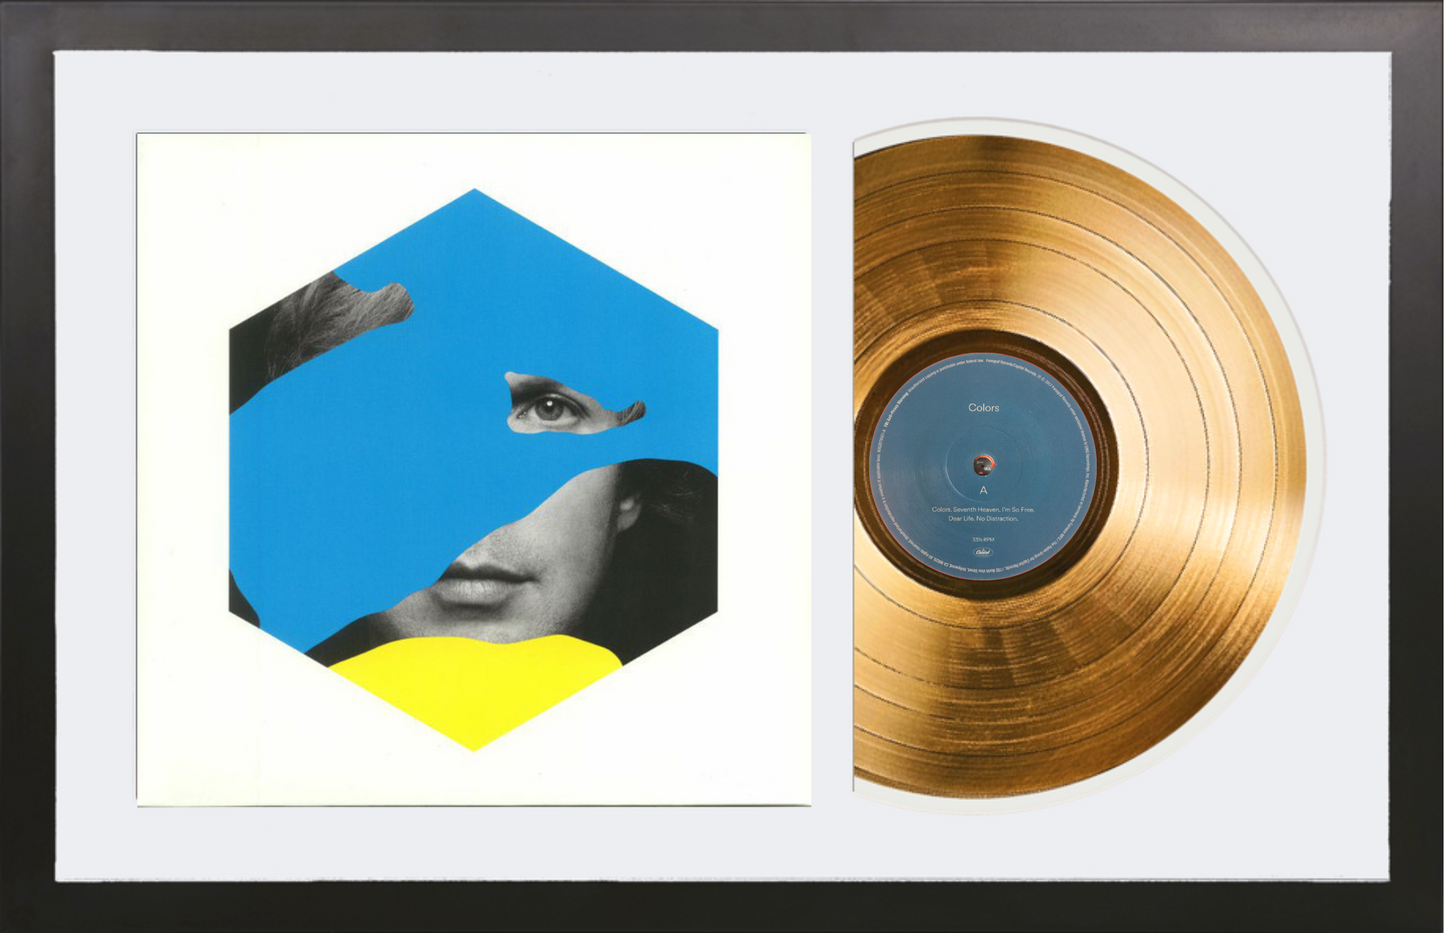 Beck - Colors - 14K Gold Plated Vinyl